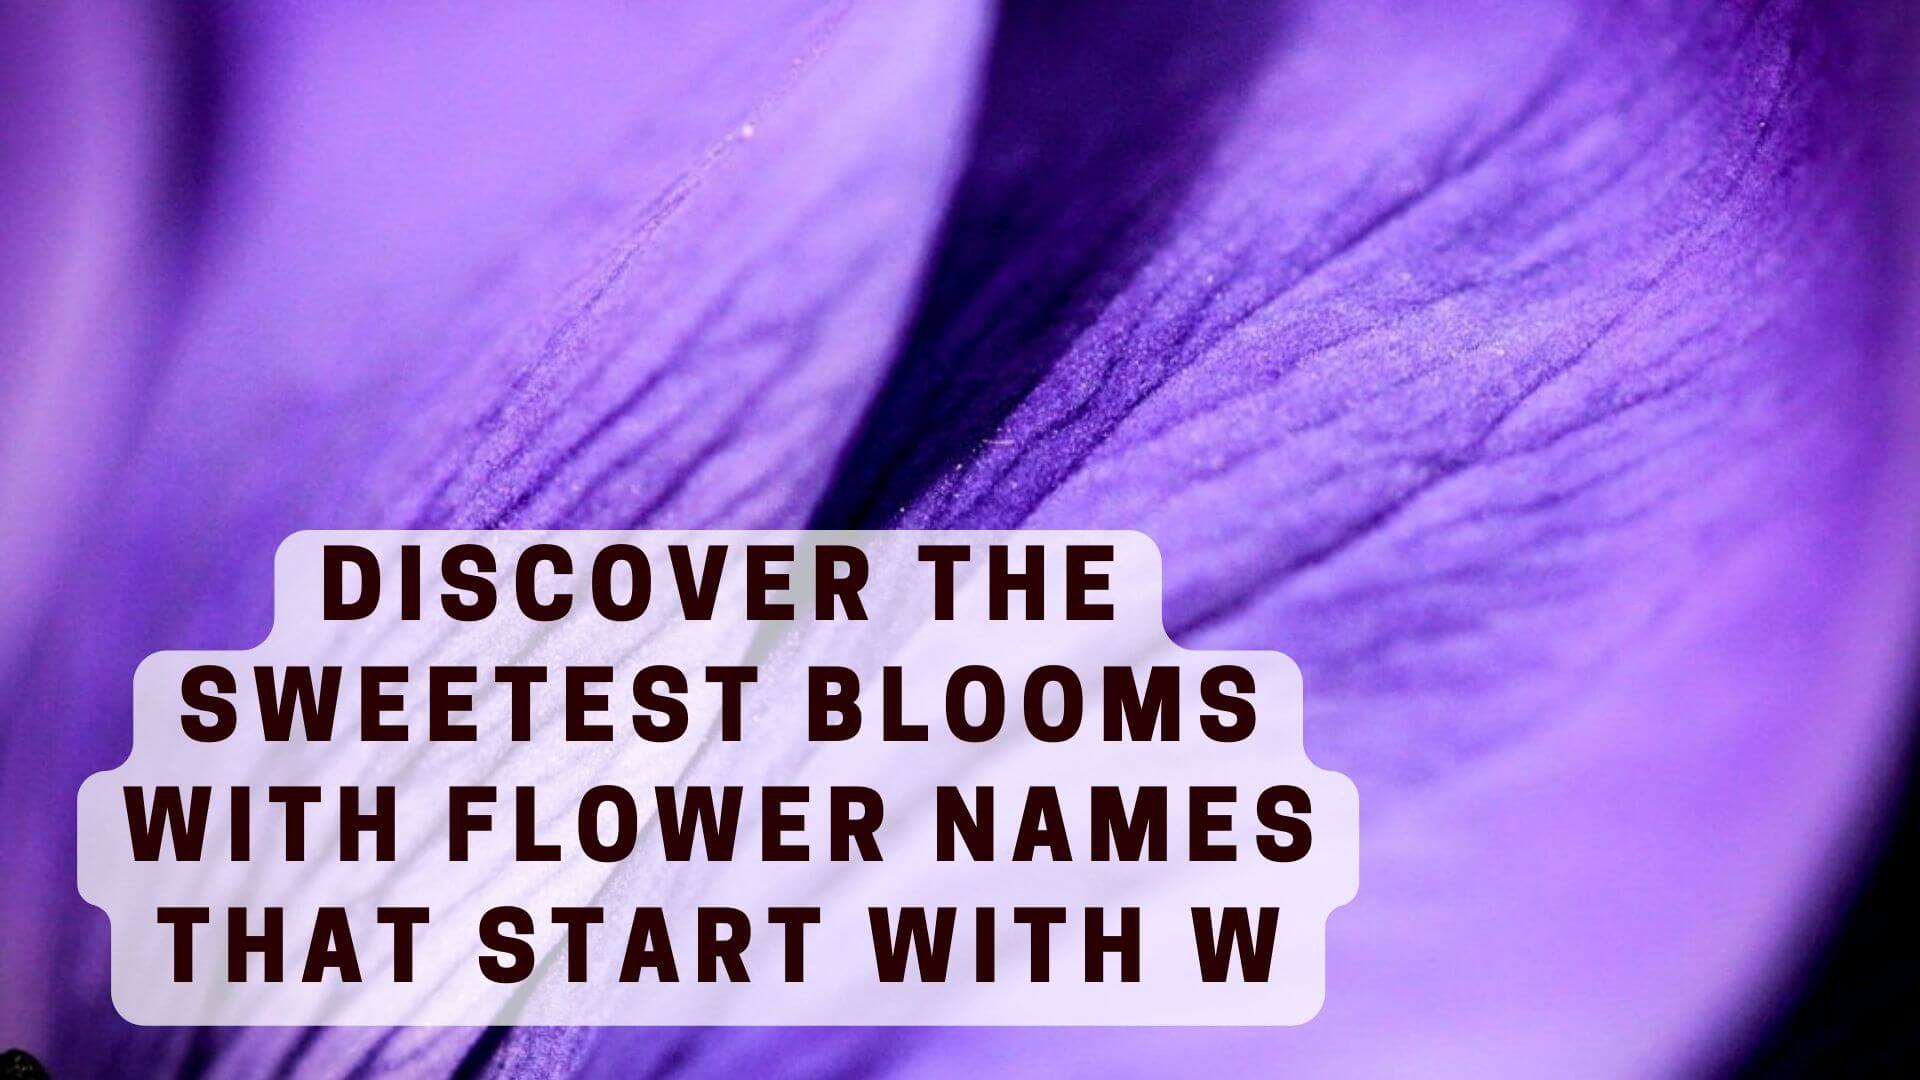 Discover the Sweetest Blooms with Flower Names that Start with W